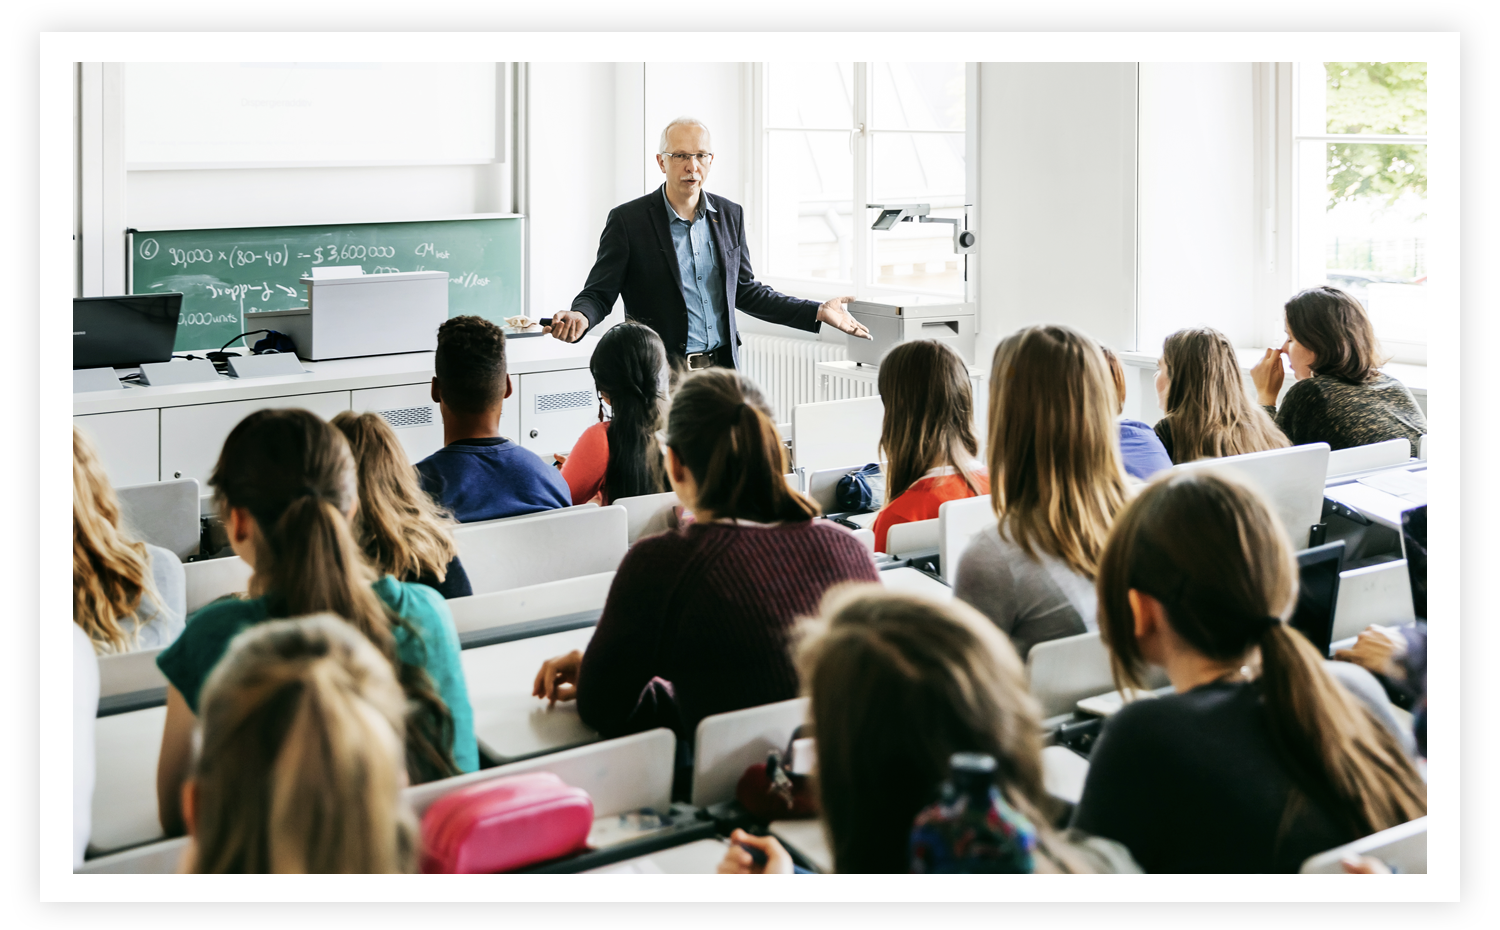 stock image of a teacher in front of a classroom of students